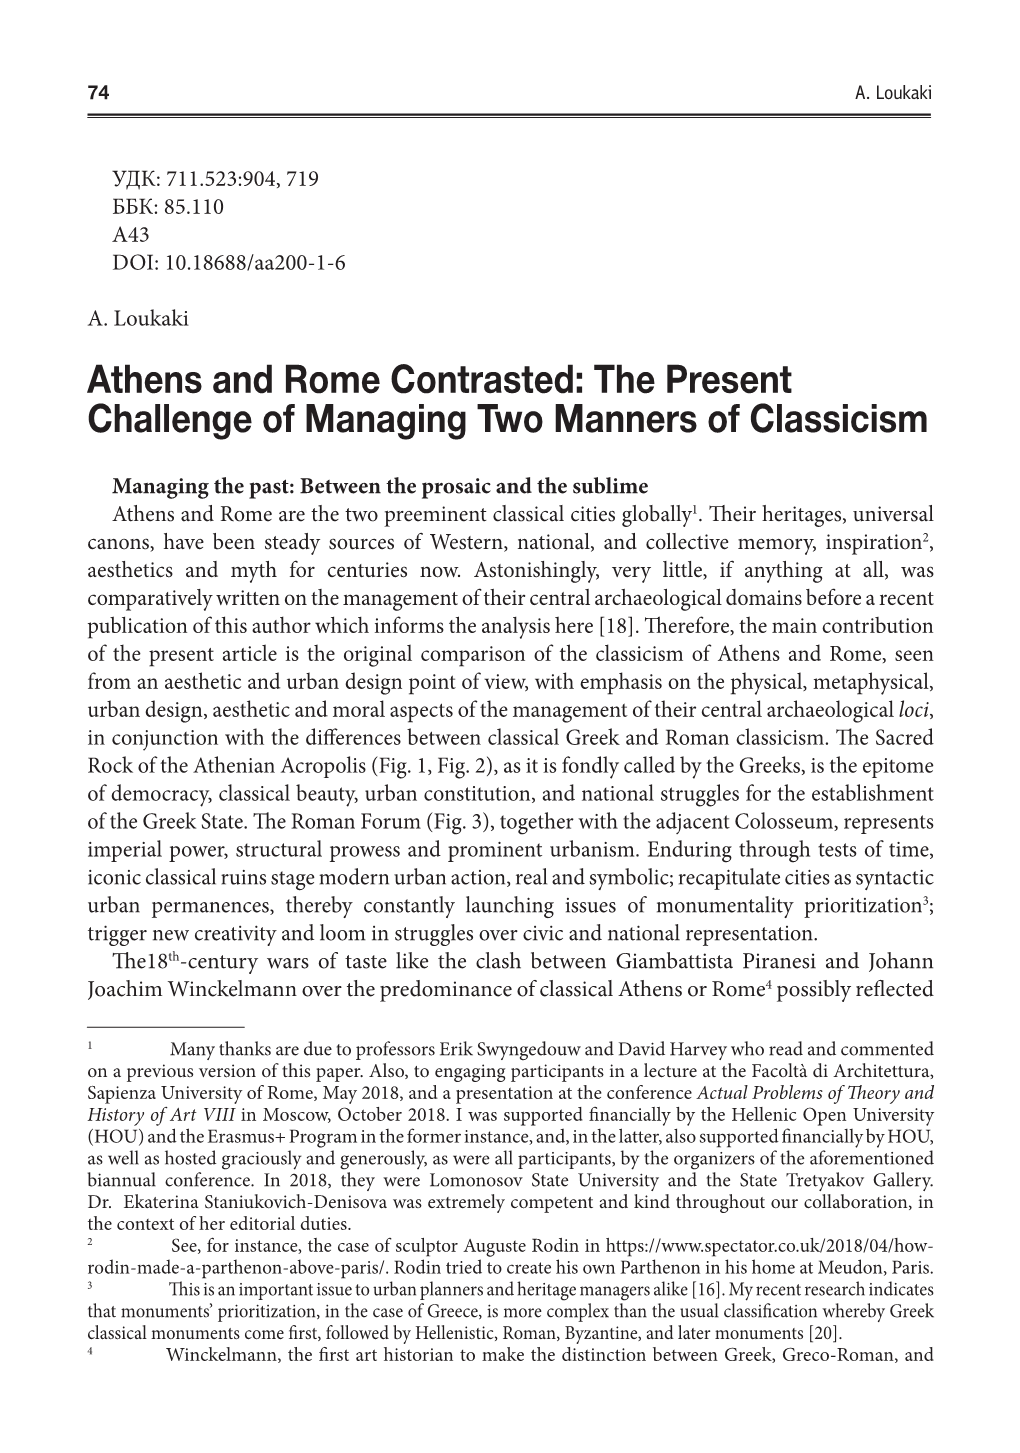 Athens and Rome Contrasted: the Present Challenge of Managing Two Manners of Classicism